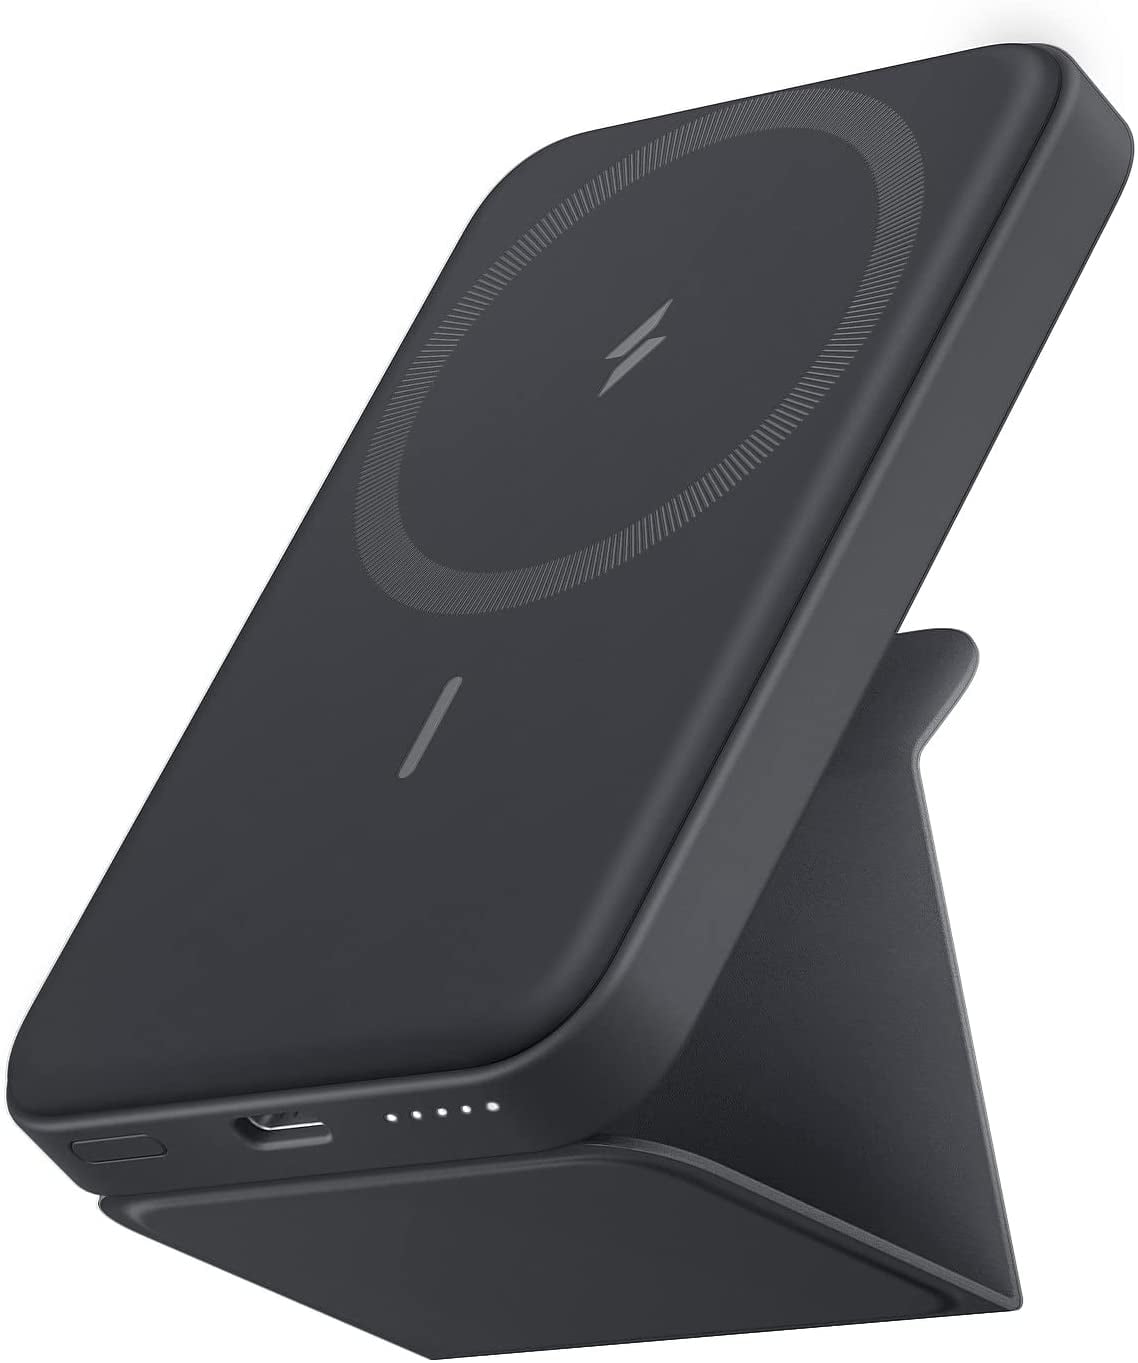 Anker 622 Magnetic Battery (MagGo) Upgraded Version, 5,000mAh Foldable  Magnetic Wireless Portable Charger and USB-C (On The Side), Only for iPhone  15/14/13/12 Series (Interstellar Gray) 